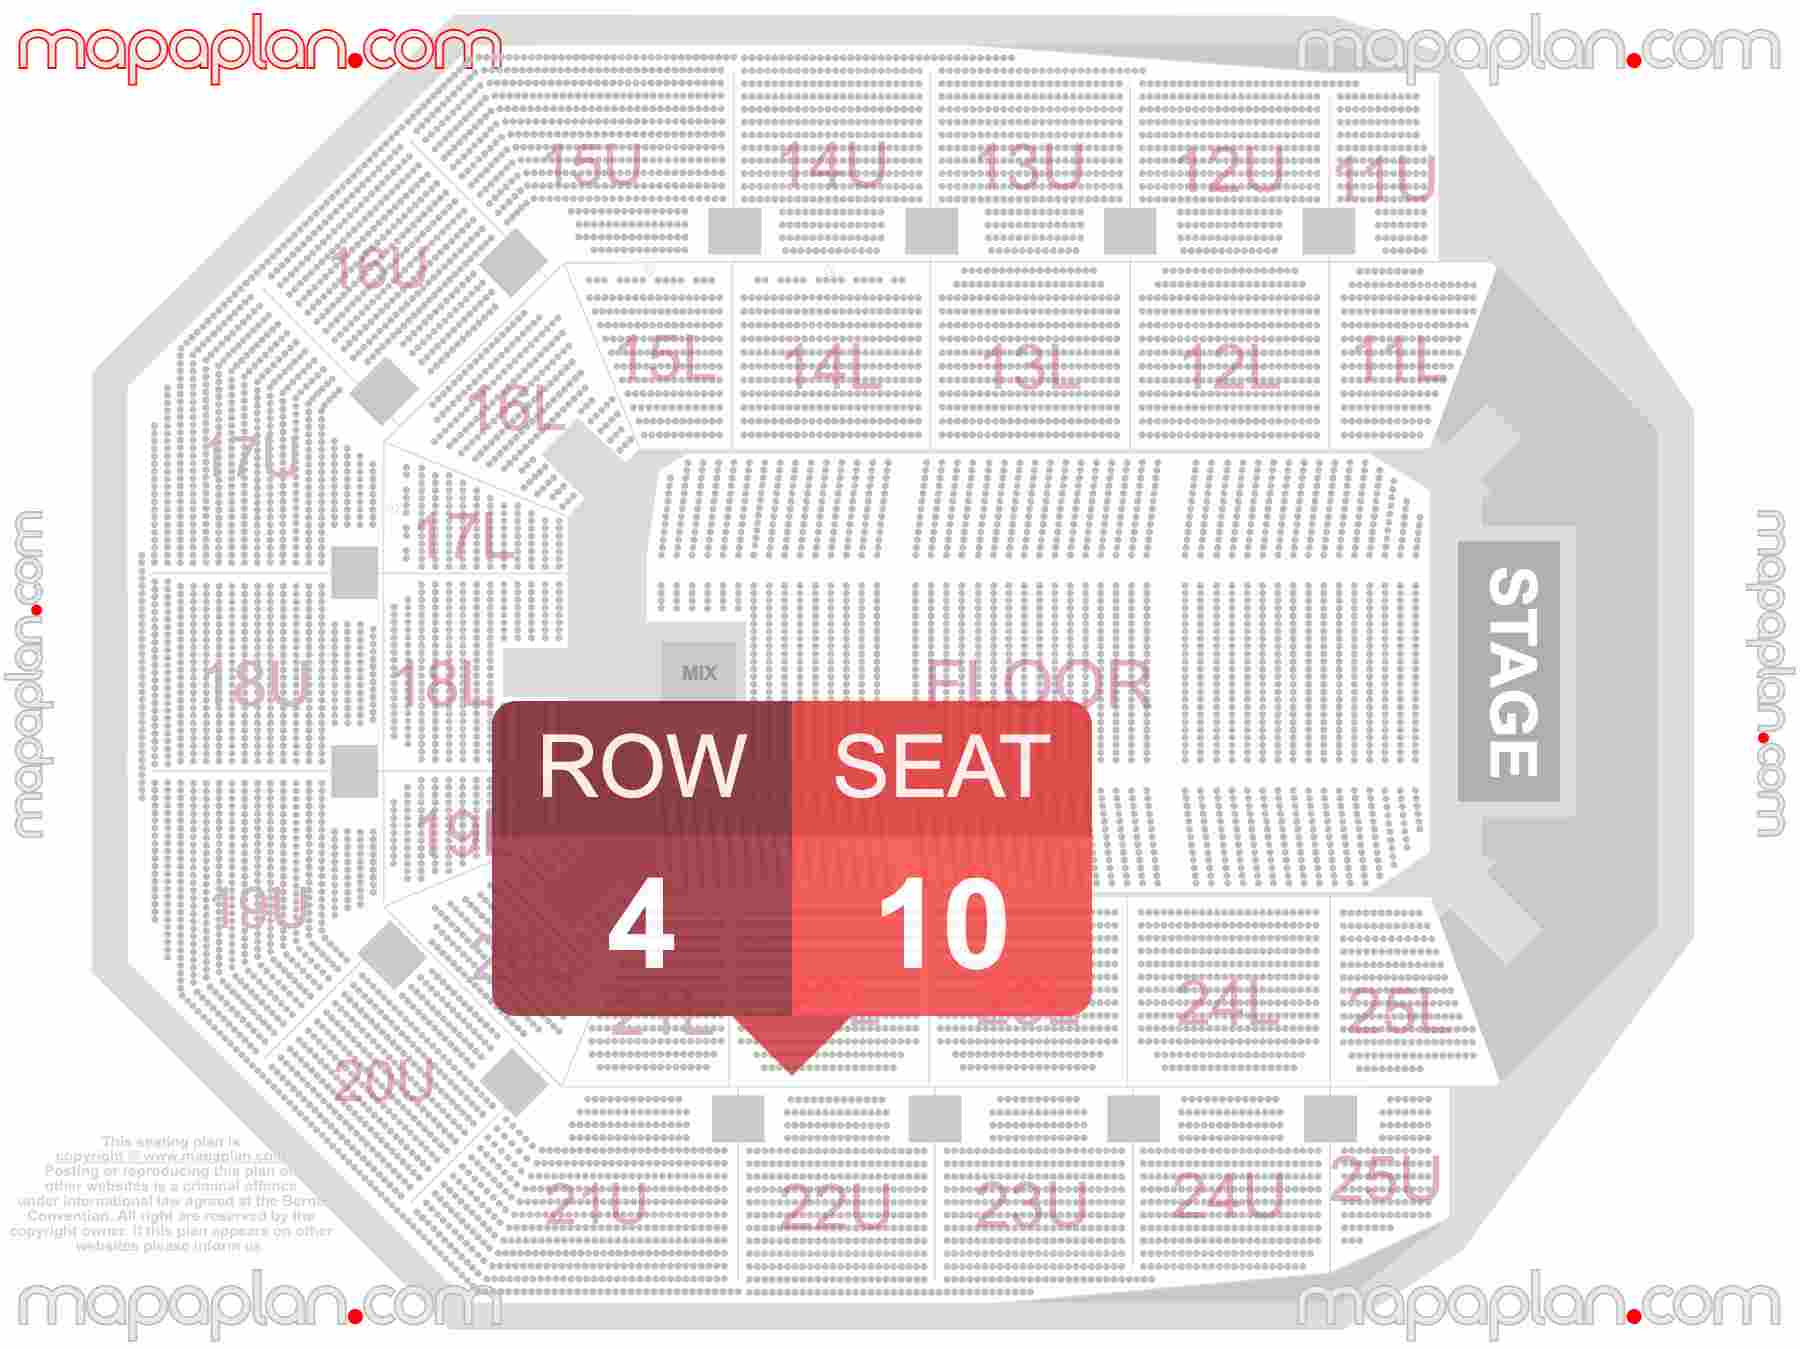 Auckland Spark Arena seating map Concert detailed seat numbers and row numbering map with interactive map plan layout